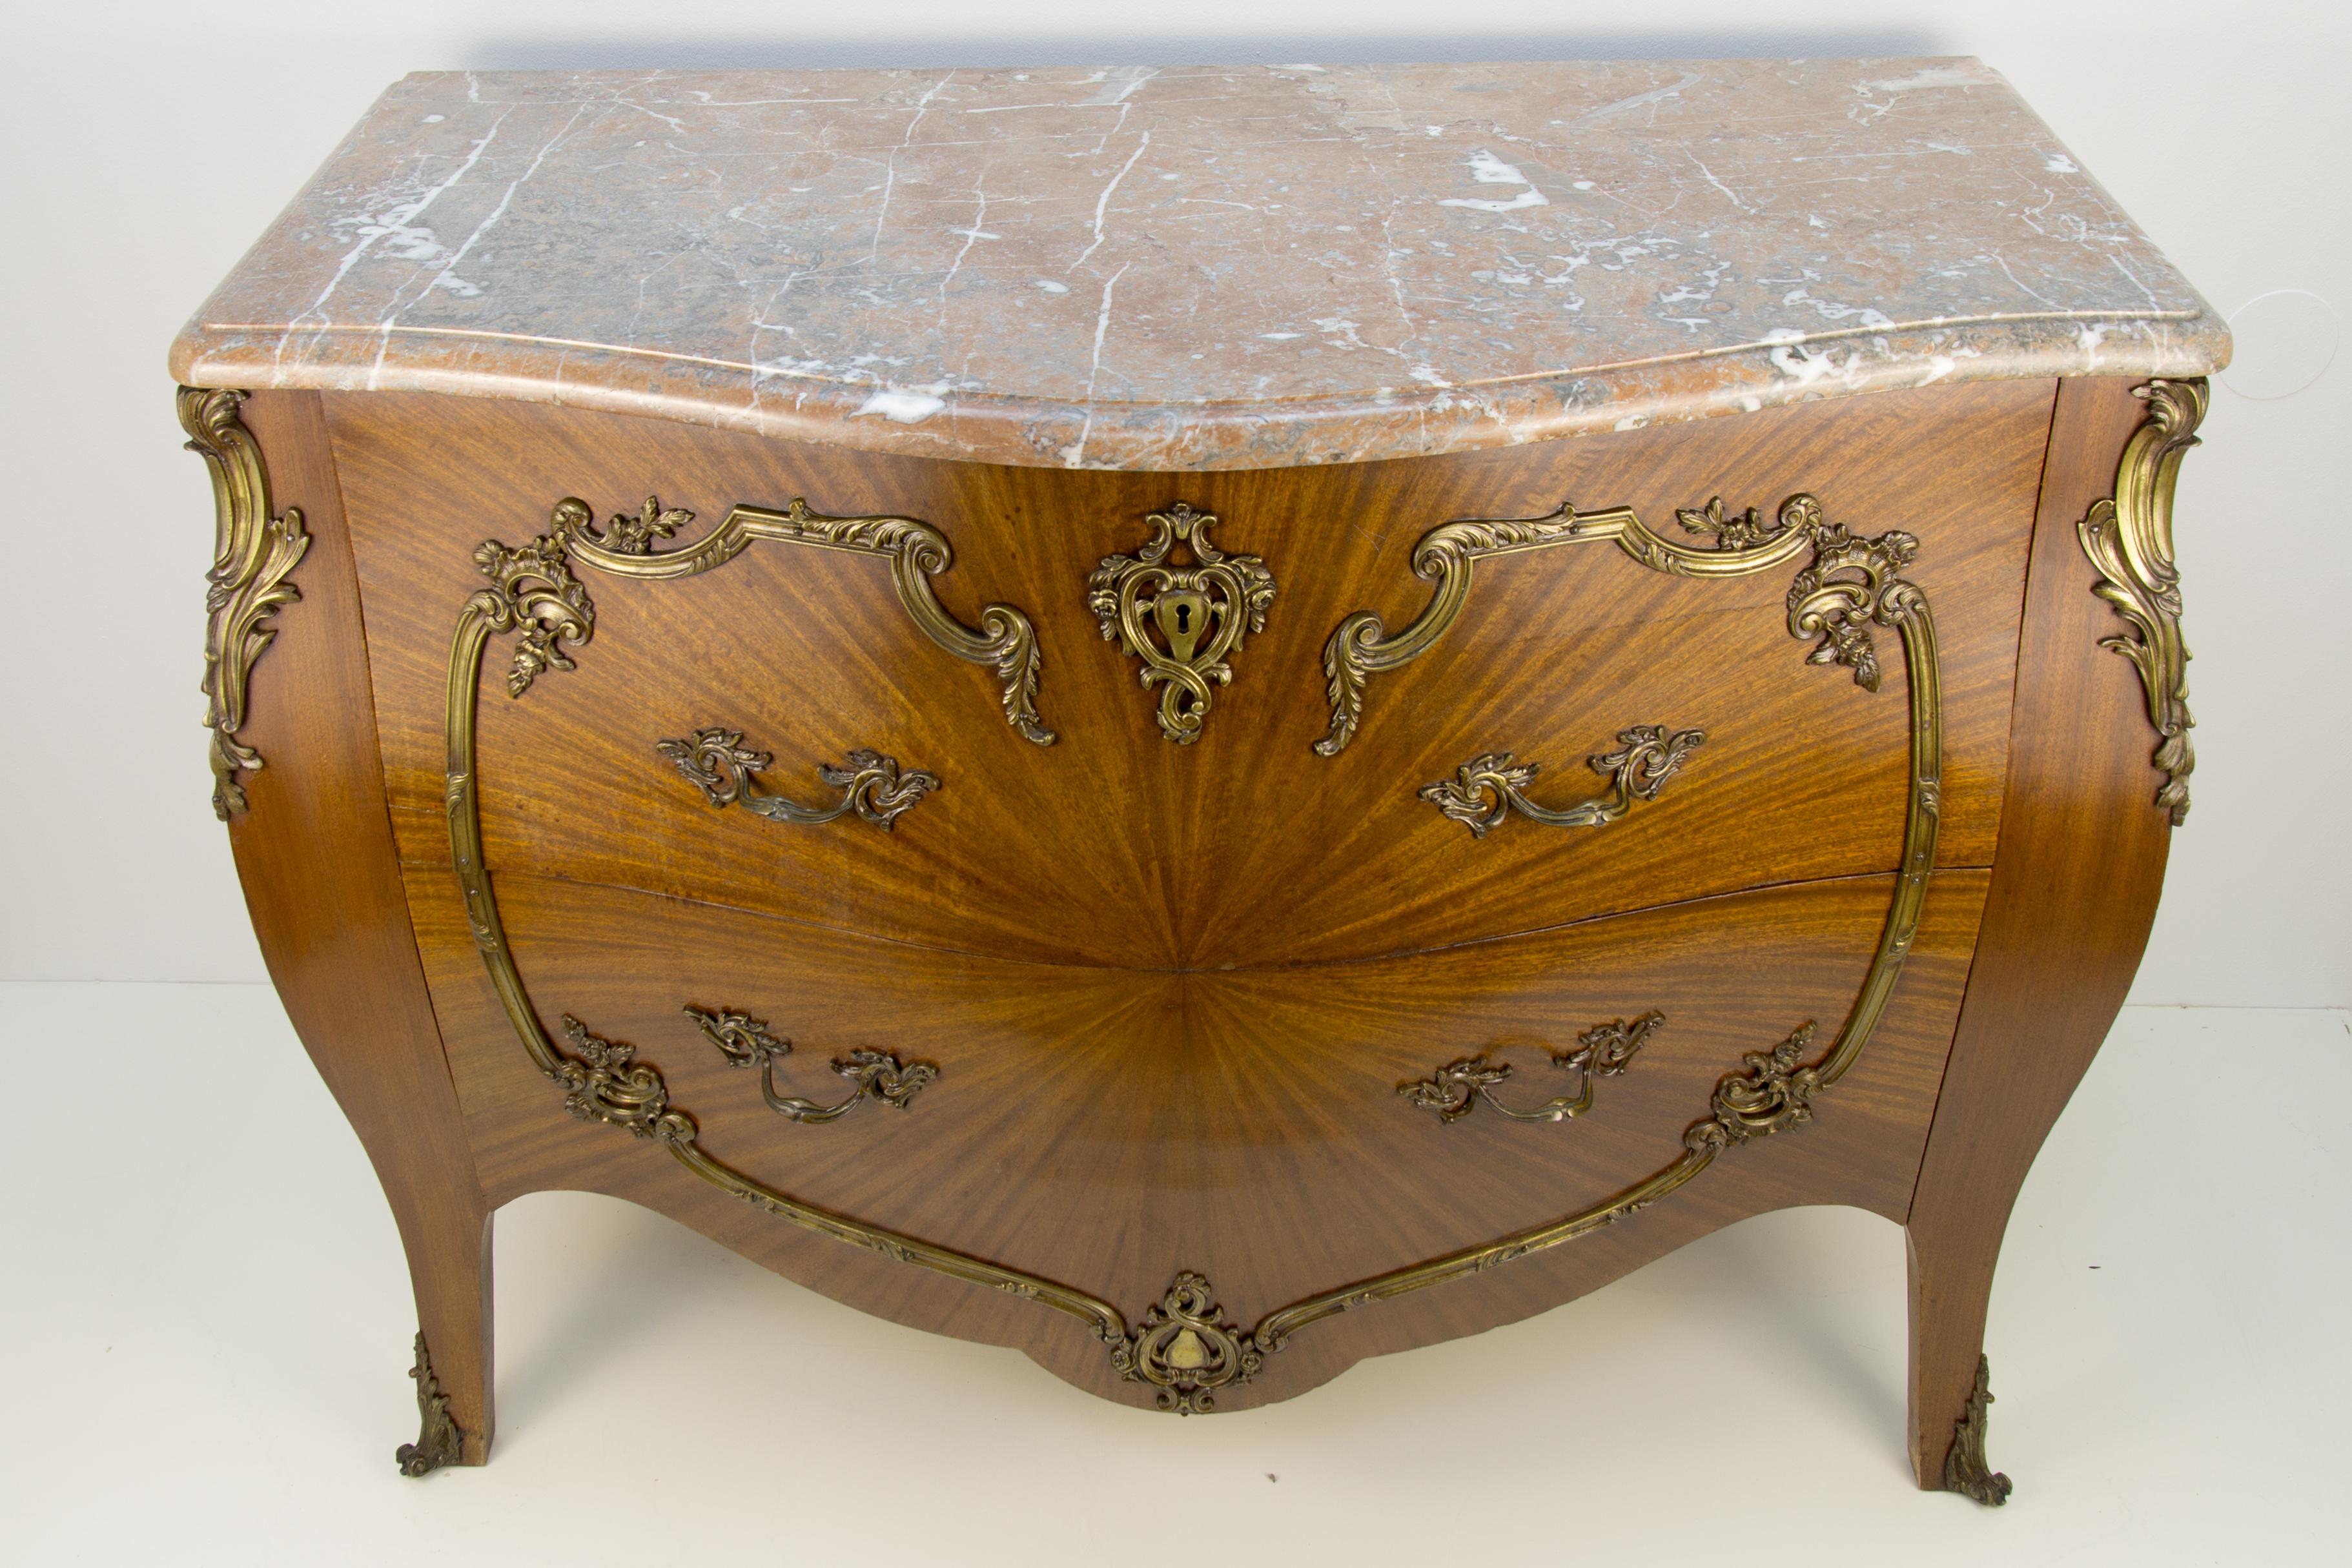 An elegant and beautifully shaped French Louis XV style bombée commode. The chest of drawers has a marble top in grey, brown, and white tones with molded edge, a bombée body with two deep drawers, and bronze scrolling mounts.
Dimensions: height 88